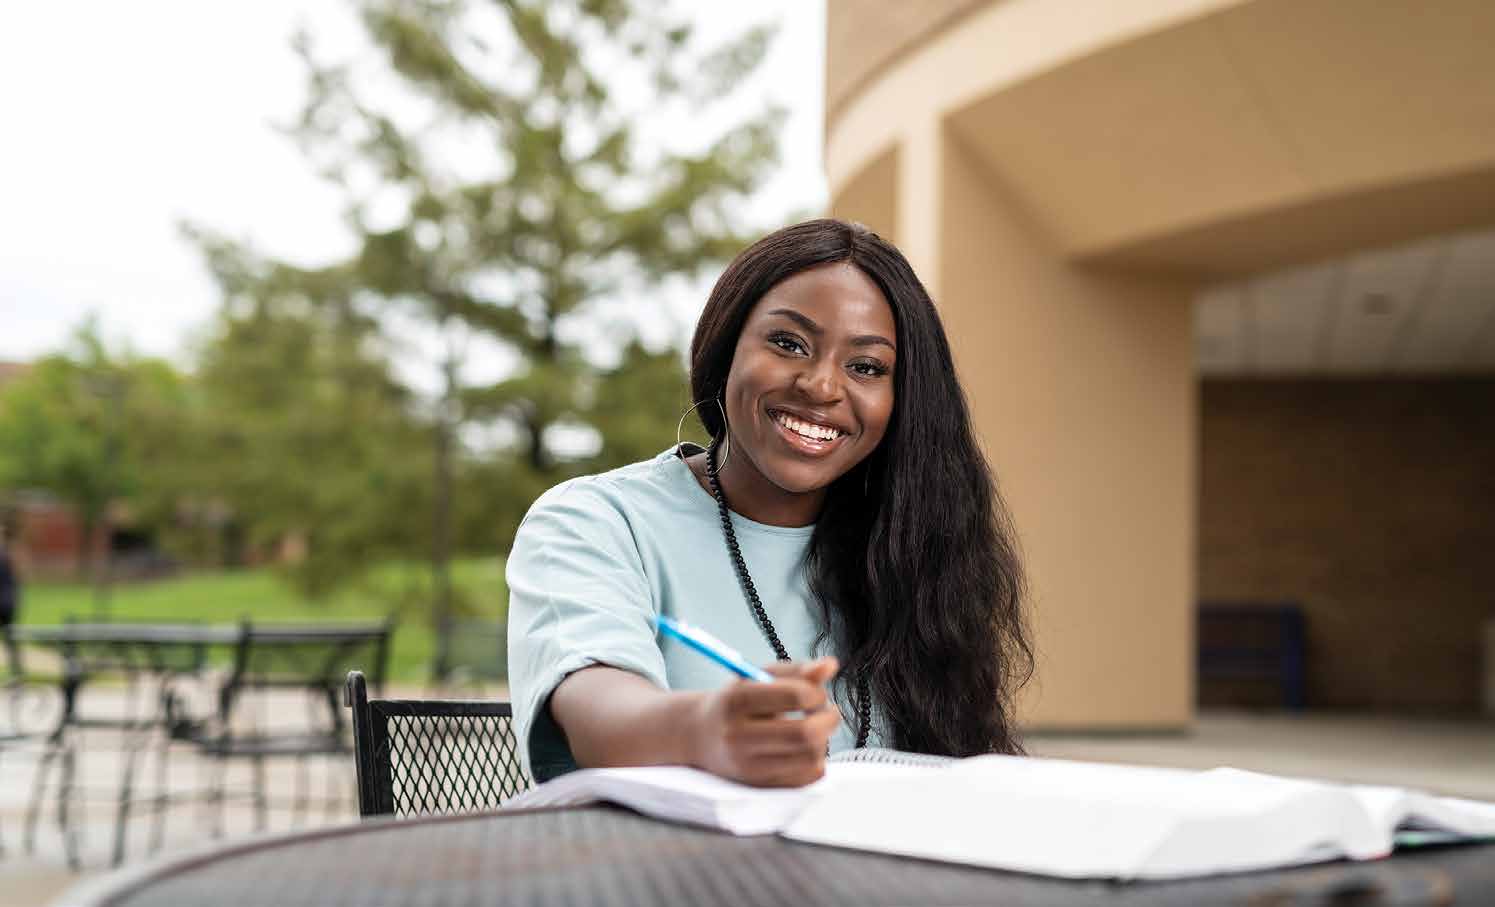 Kelechi Ofodu, a 17-year-old Degree in 3 student from Lee’s Summit, Missouri, starts classes at Metropolitan Community College this fall. She’ll take advantage of KU Edwards Campus’ MetroRate to pay in-state tuition costs.Photo by Steve Puppe.